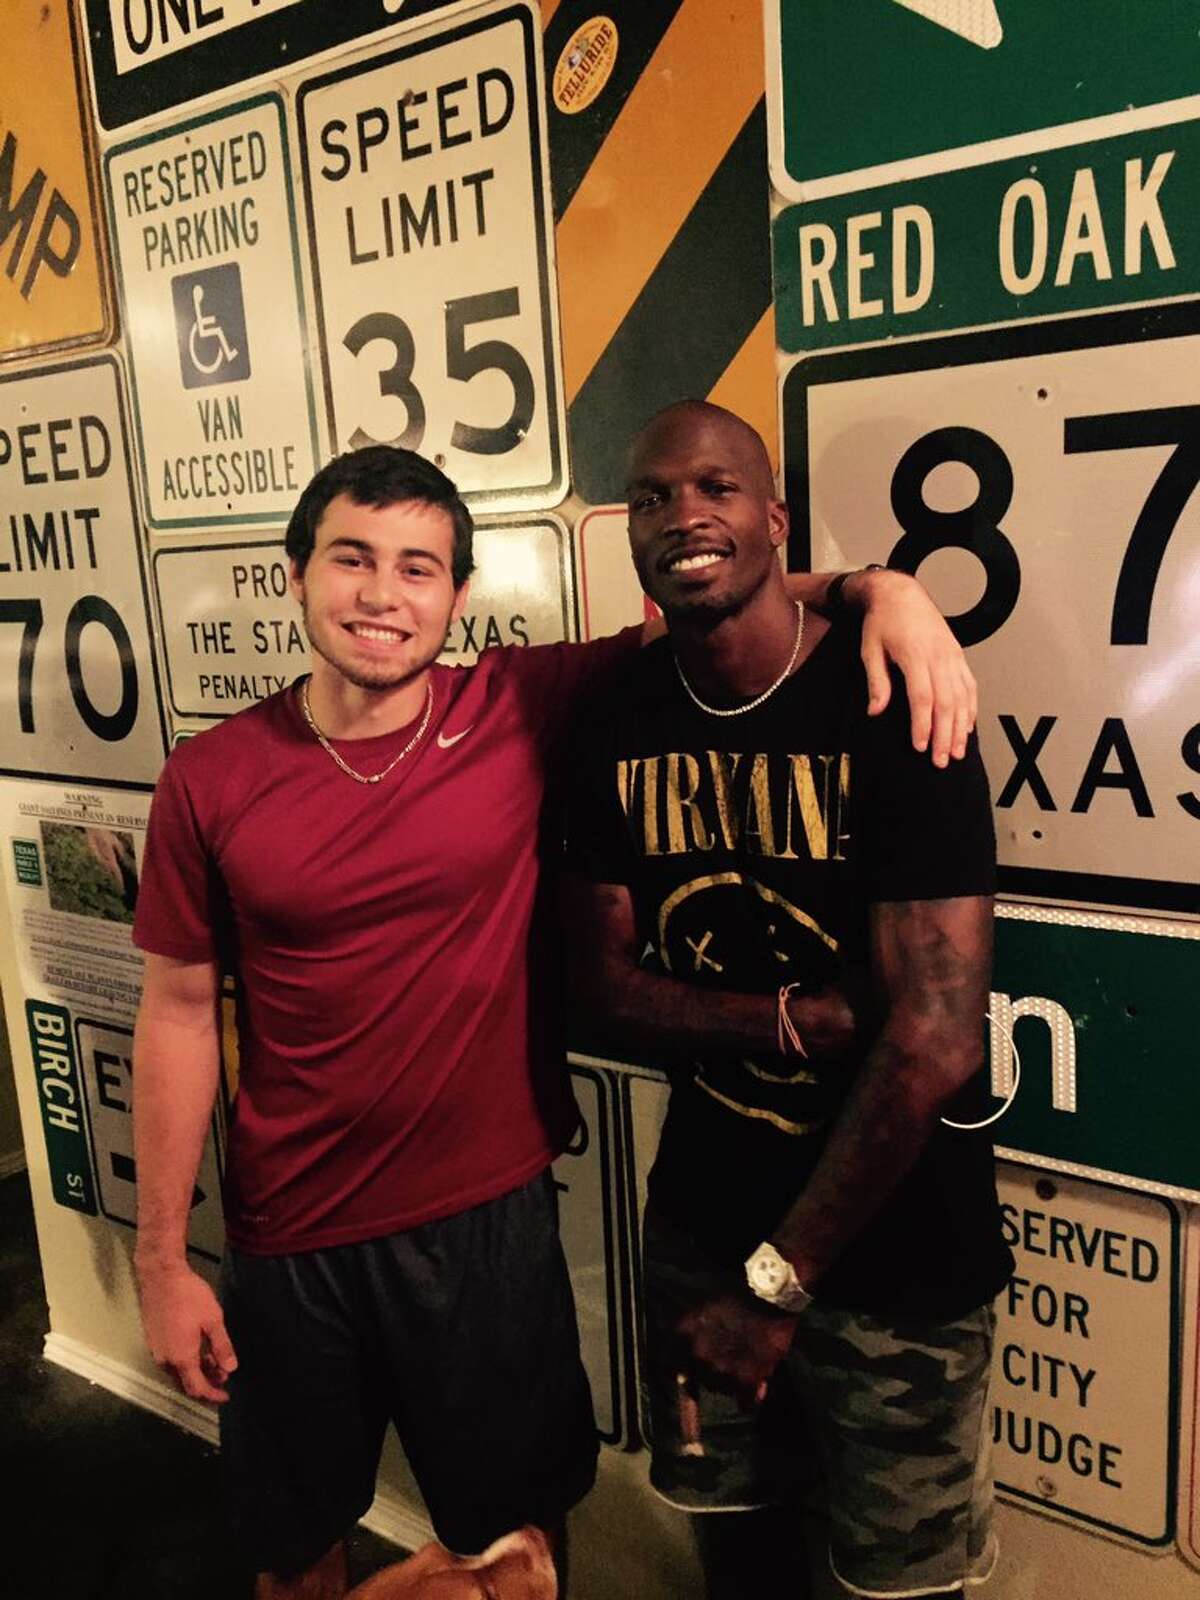 Ex-NFL star Chad 'Ochocinco' Johnson plays FIFA with Texas State football players for 10 hours Over the summer, former NFL star Chad Johnson gamed with a few members of Texas State University's football team for 10 hours. Johnson was in the area for an autograph event.Click here to read more